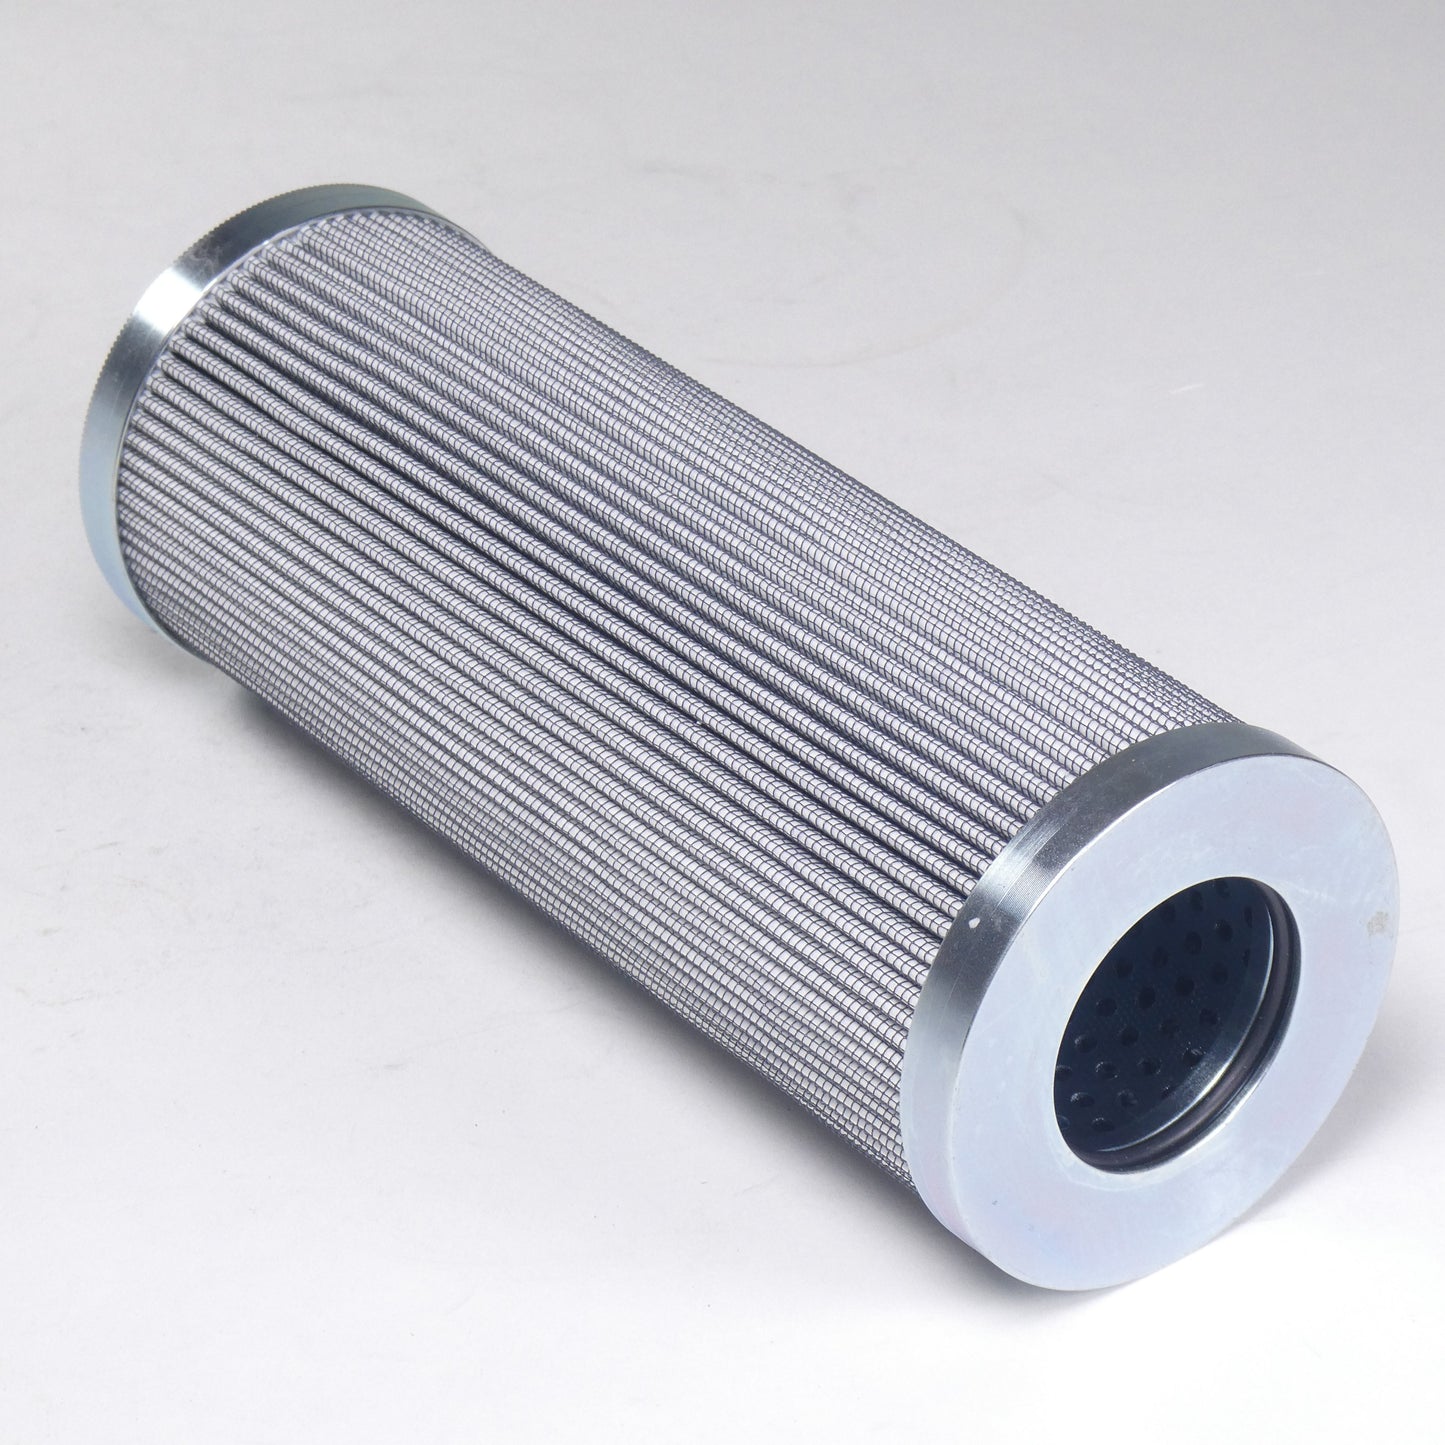 Hydrafil Replacement Filter Element for Donaldson P167185